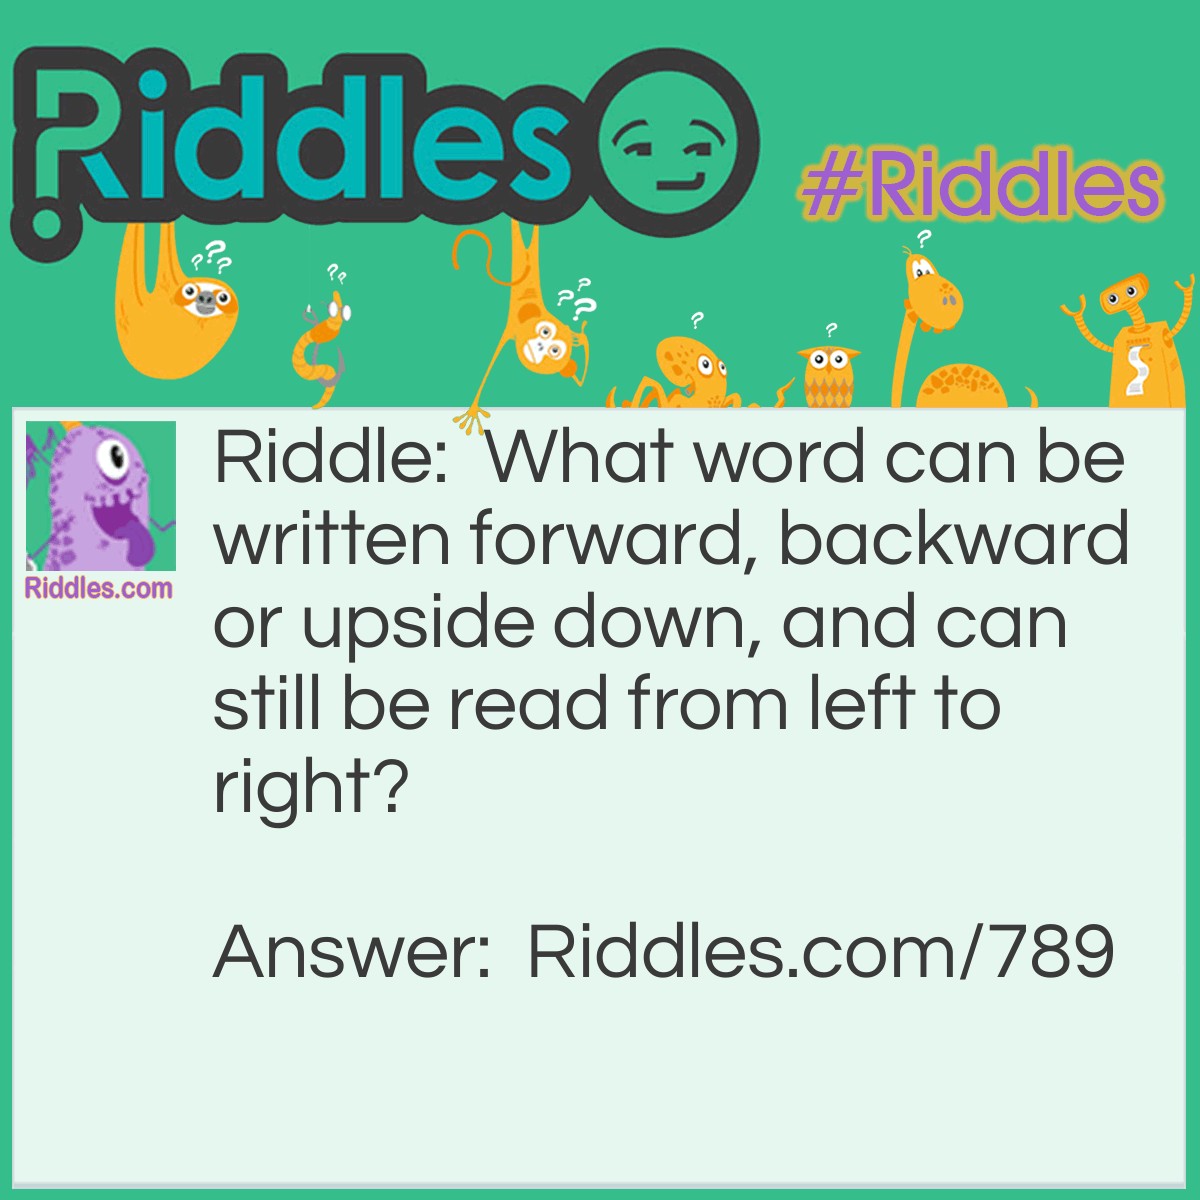 Riddle: What word can be written forward, backward or upside down, and can still be read from left to right? Answer: NOON.